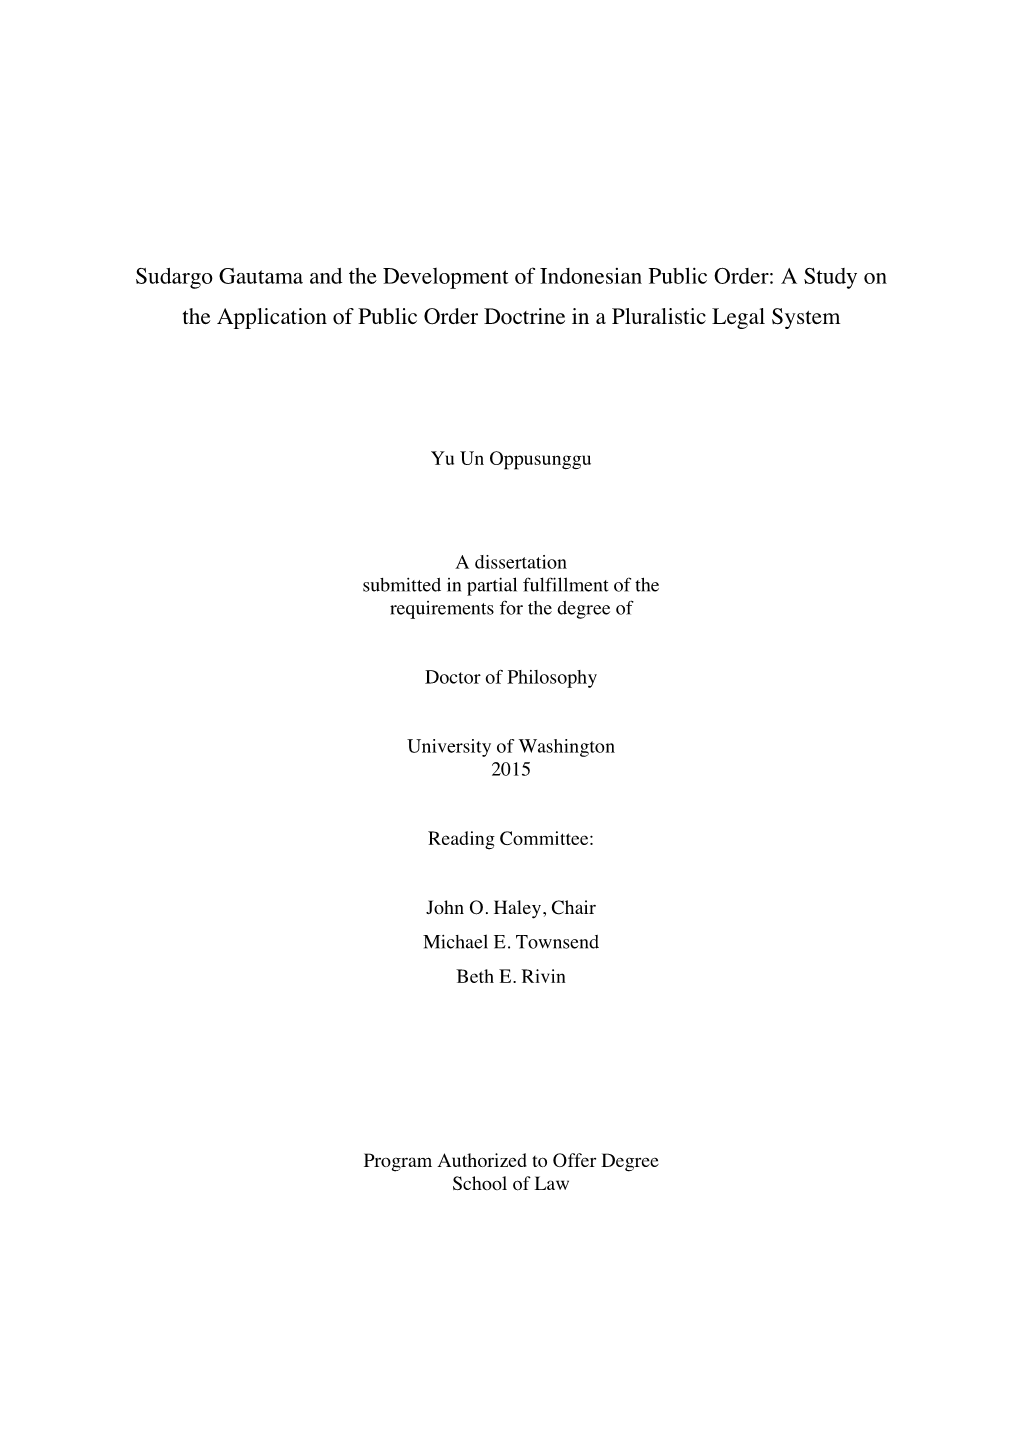 Sudargo Gautama and the Development of Indonesian Public Order: a Study on the Application of Public Order Doctrine in a Pluralistic Legal System